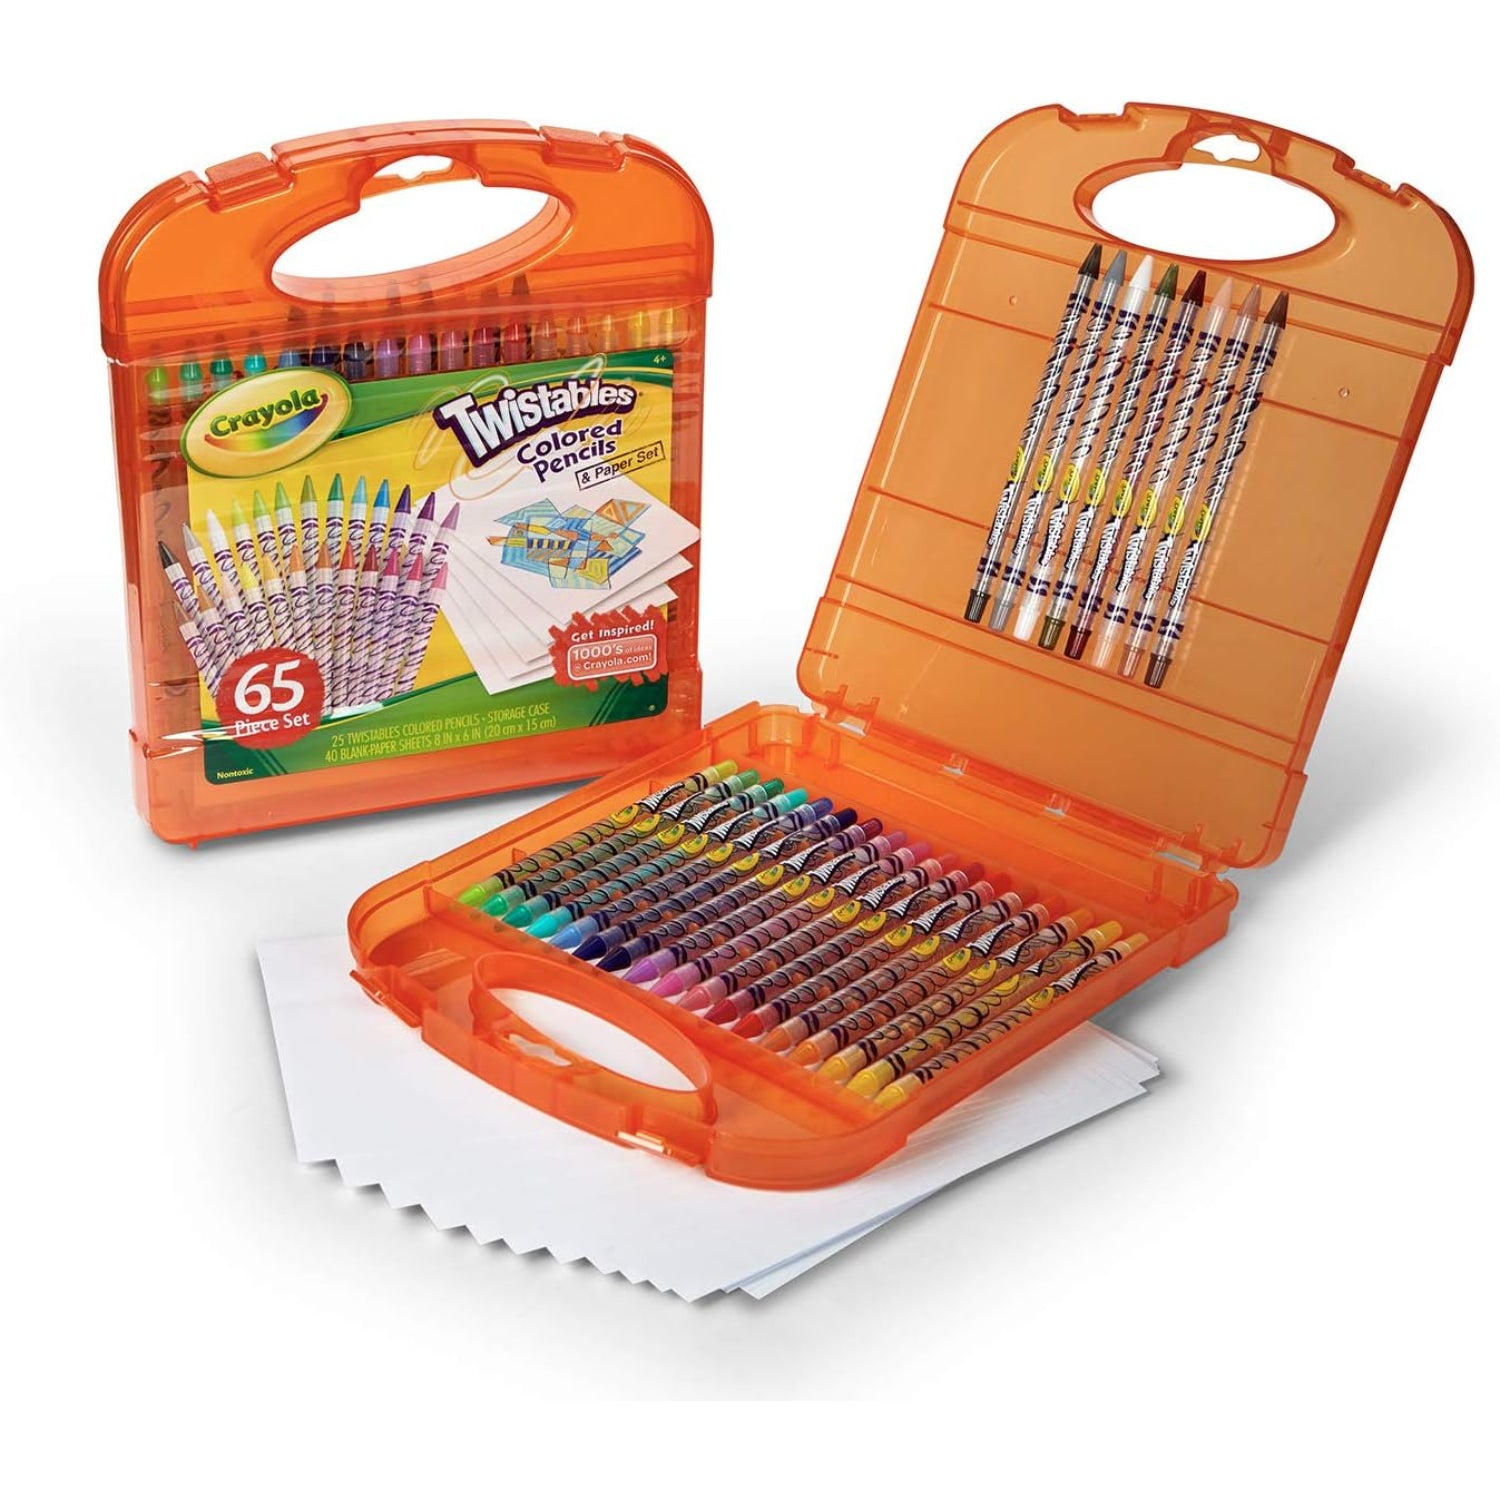 Crayola Paint Brush Set - Assorted Colors (8 and 50 similar items